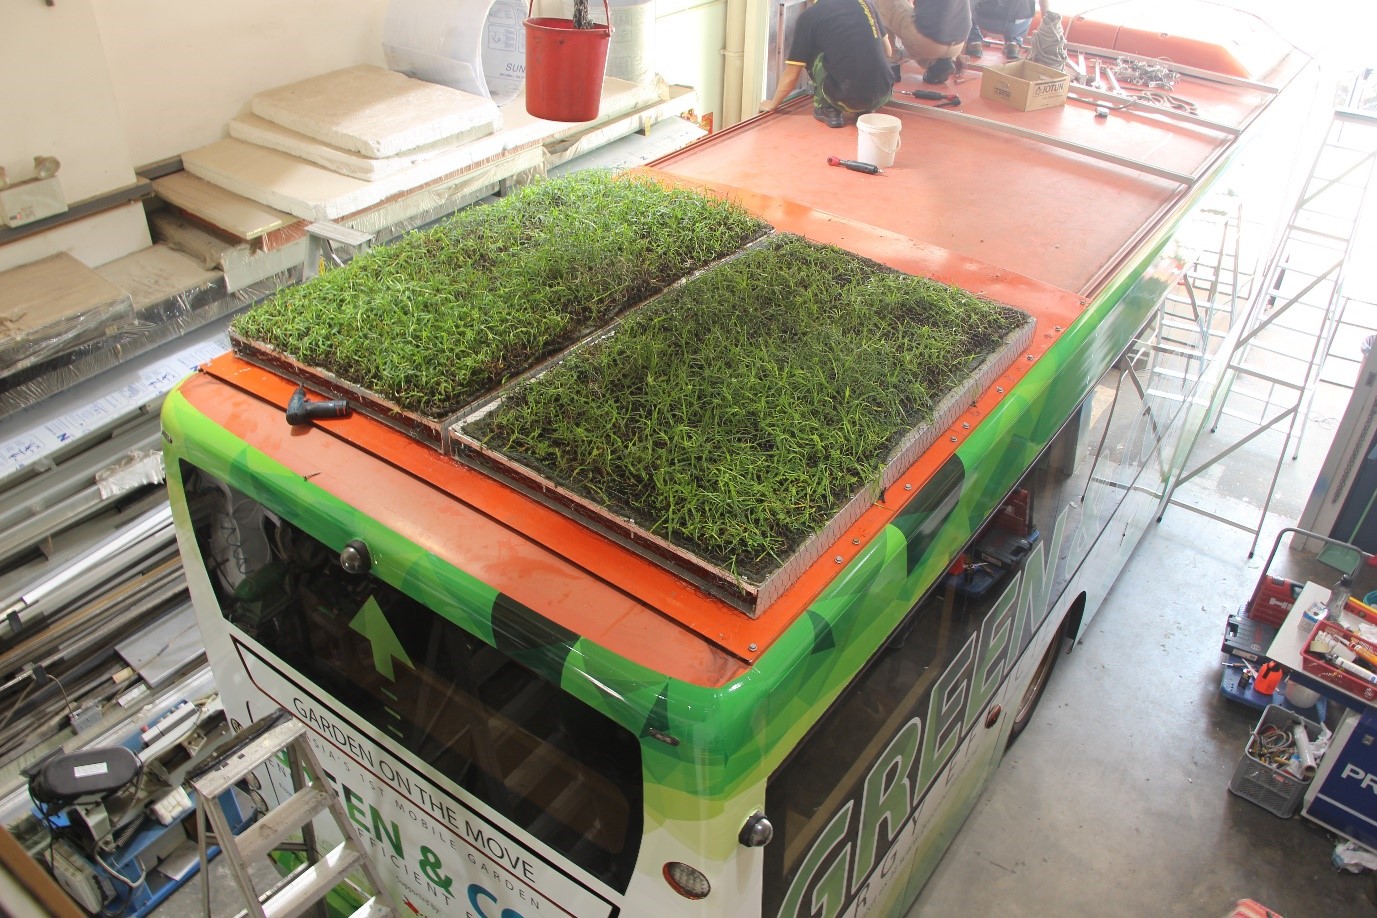 The Gaiamat is a lightweight green mat that weighs up to 2-3 times lighter than conventional green roof systems. This reduces loading on the bus while also allowing for easier installation and maintenance to be carried out.